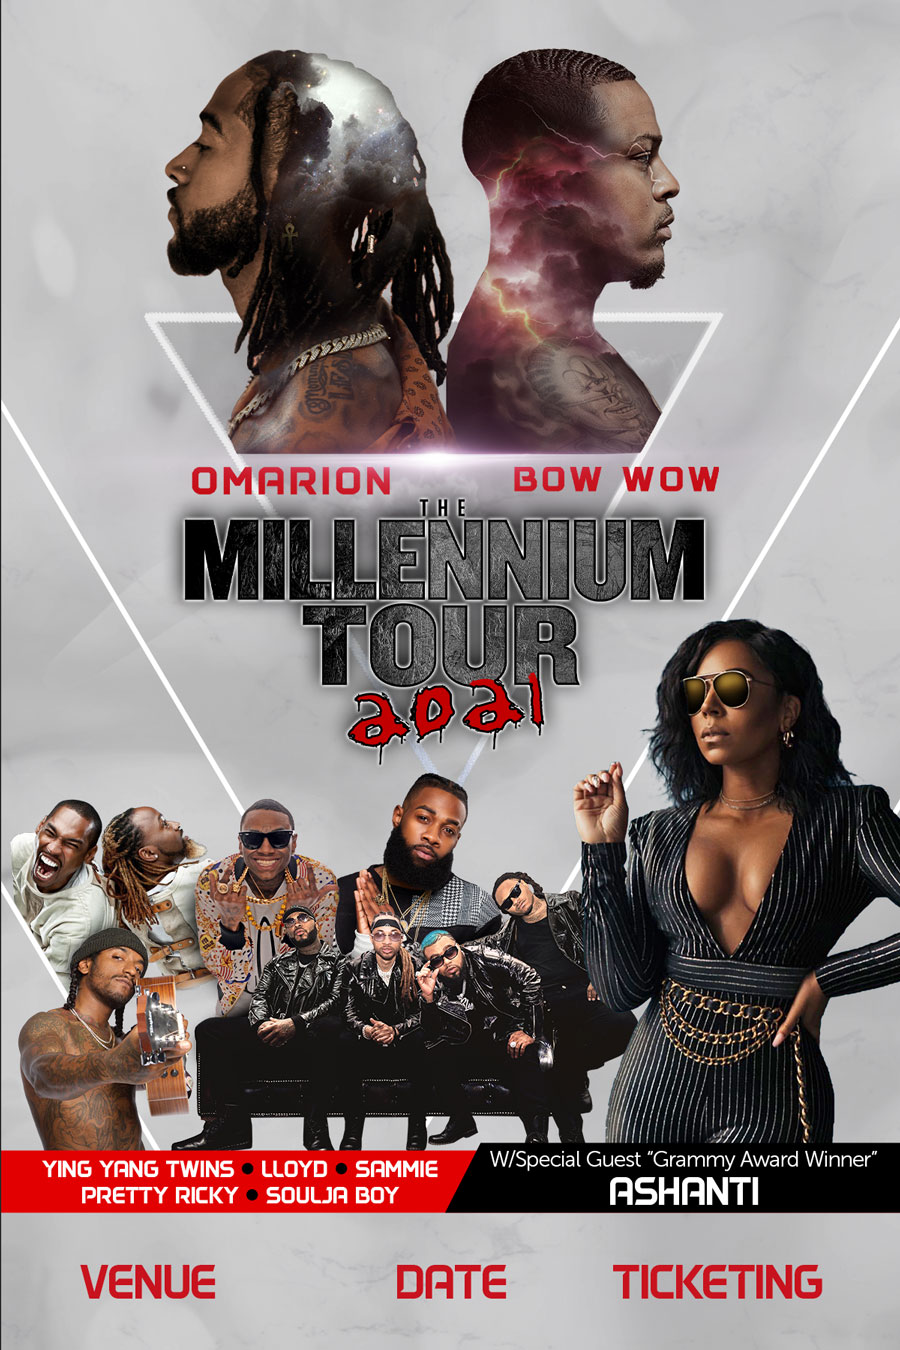 The Millennium Tour 2021 New Dates Announced, Event to Feature Ashanti, Omarion, Bow Wow, Ying Yang Twins, and More